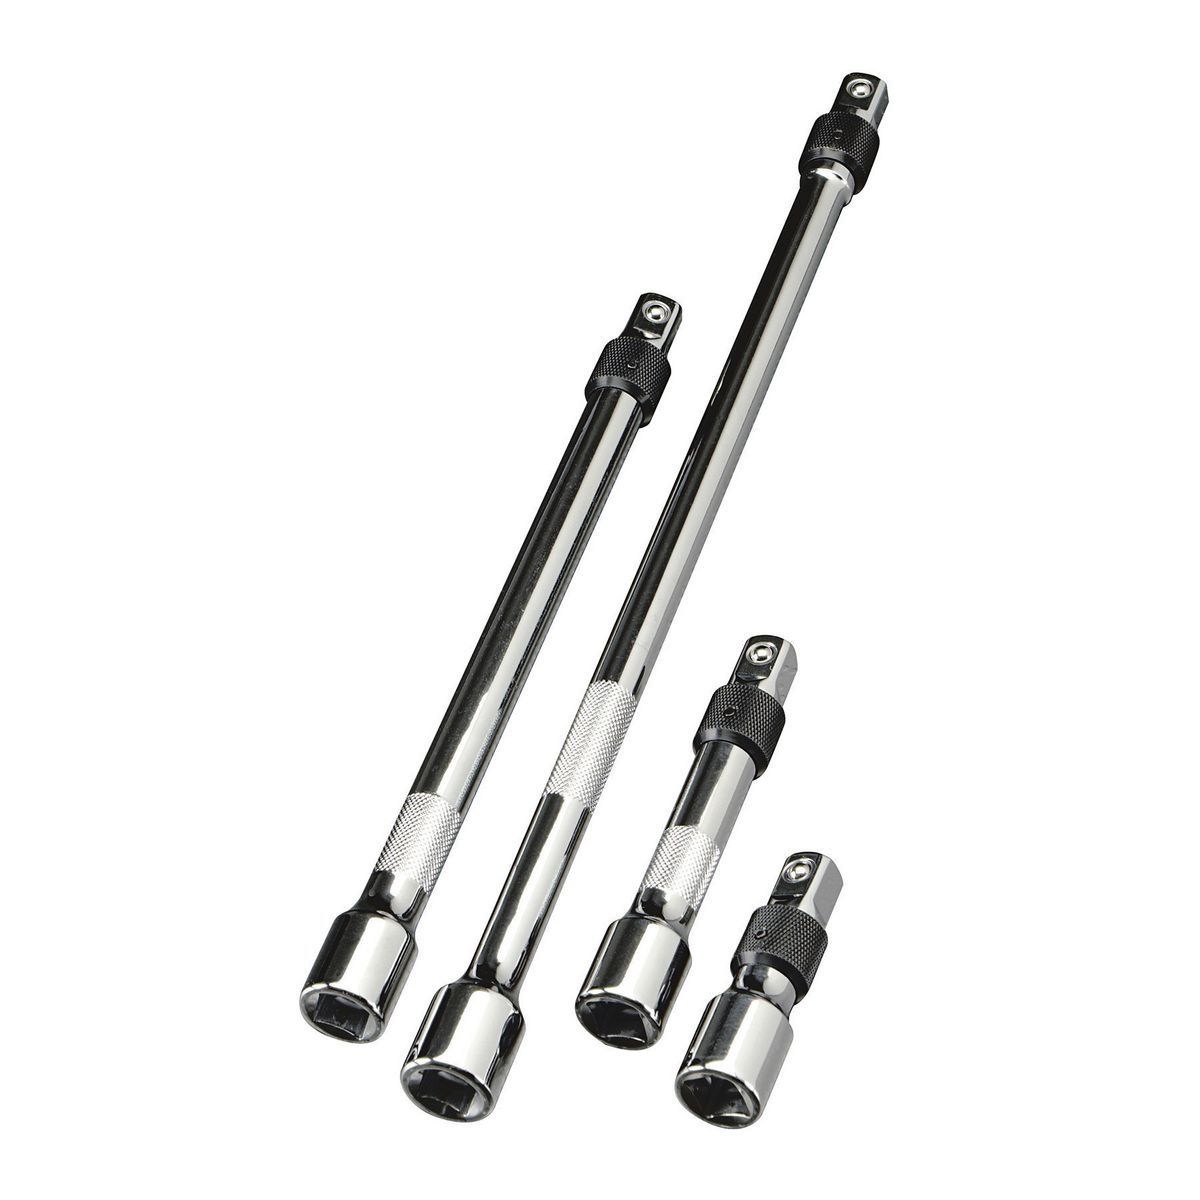 PITTSBURGH PRO 1/2 in. Drive Quick-Release Extension Bar Set, 4 Piece